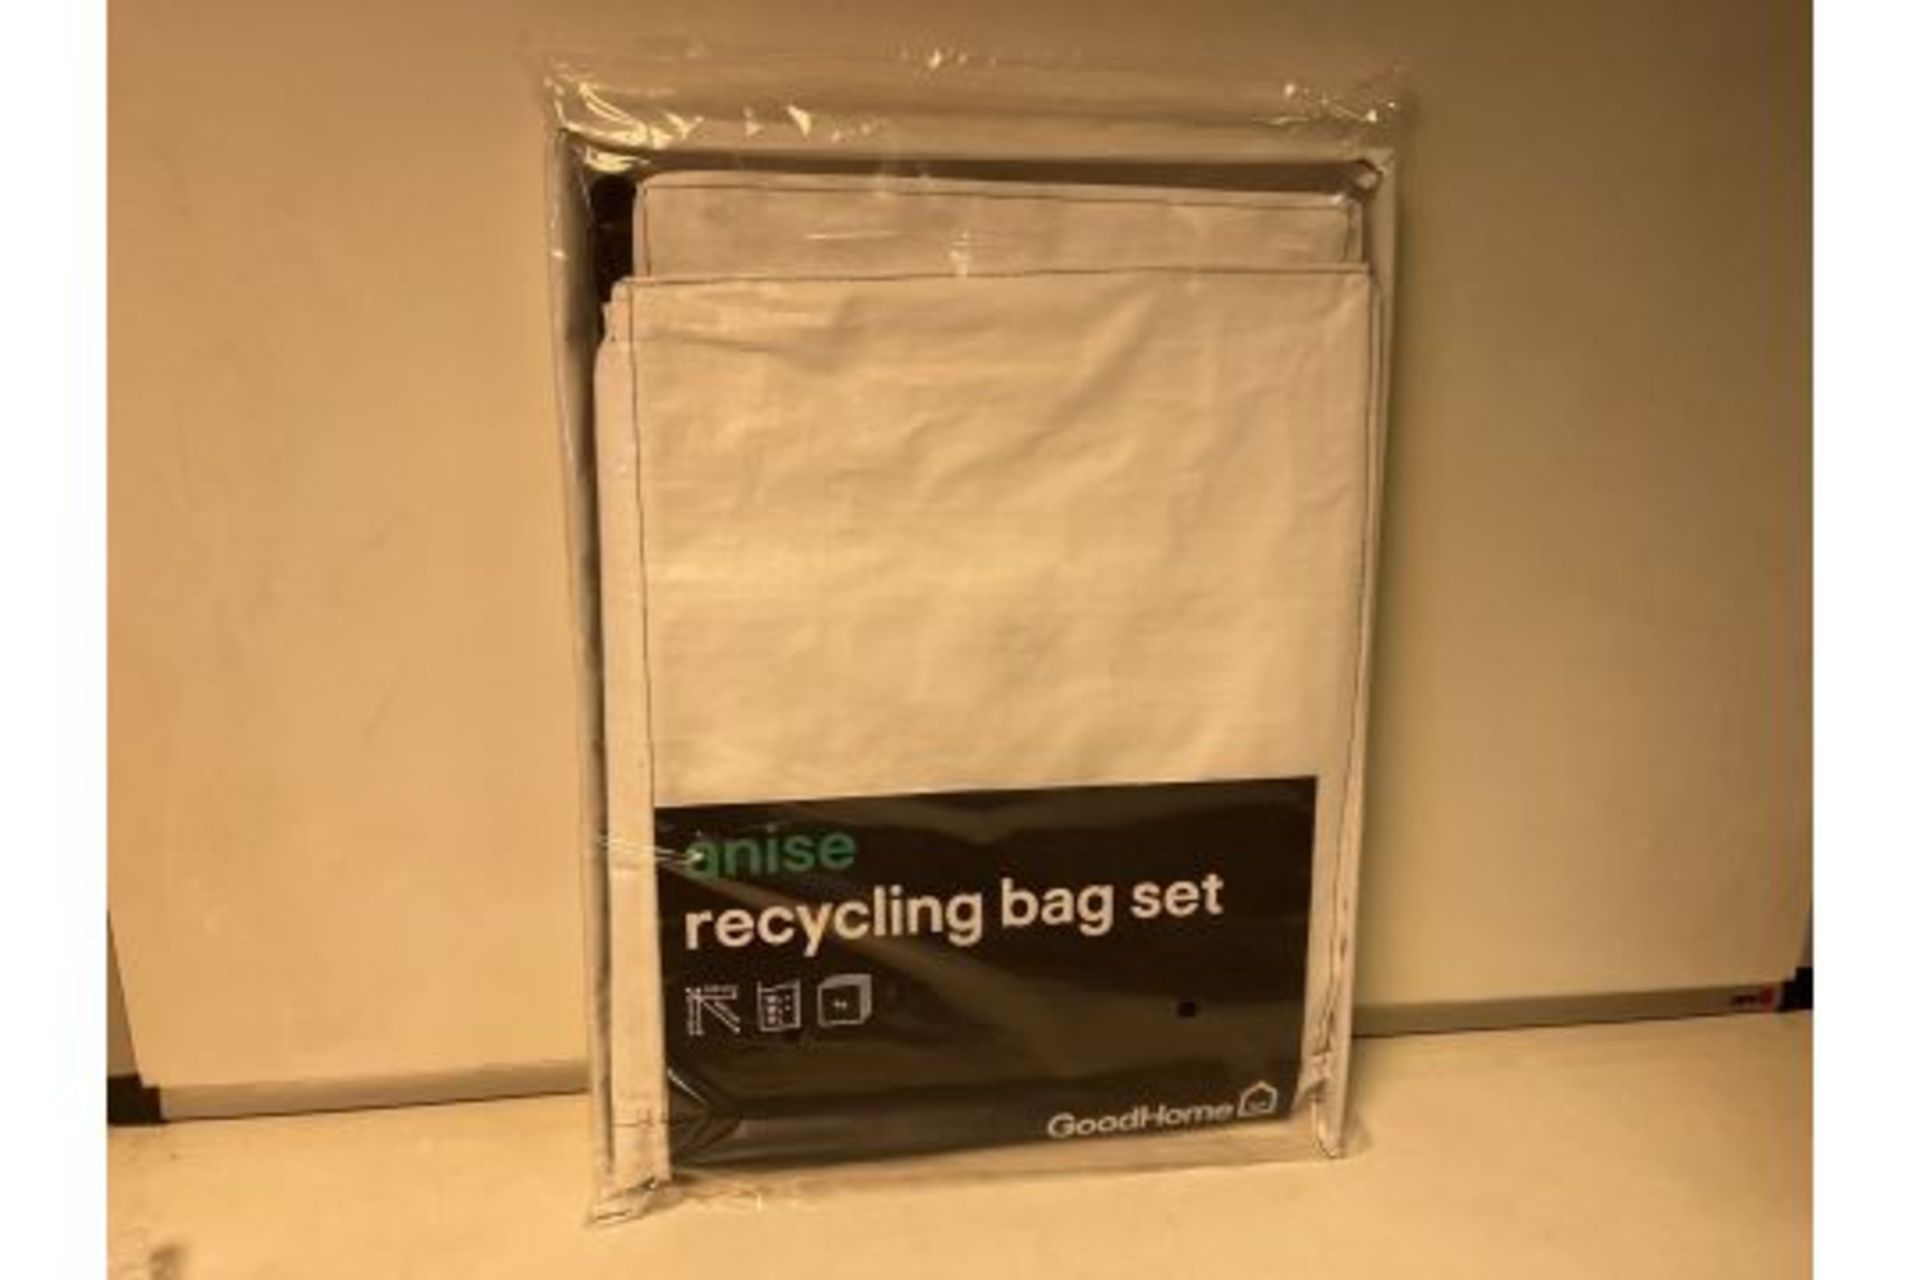 54 X BRAND NEW ANISE RECYCLING BAG SETS R15